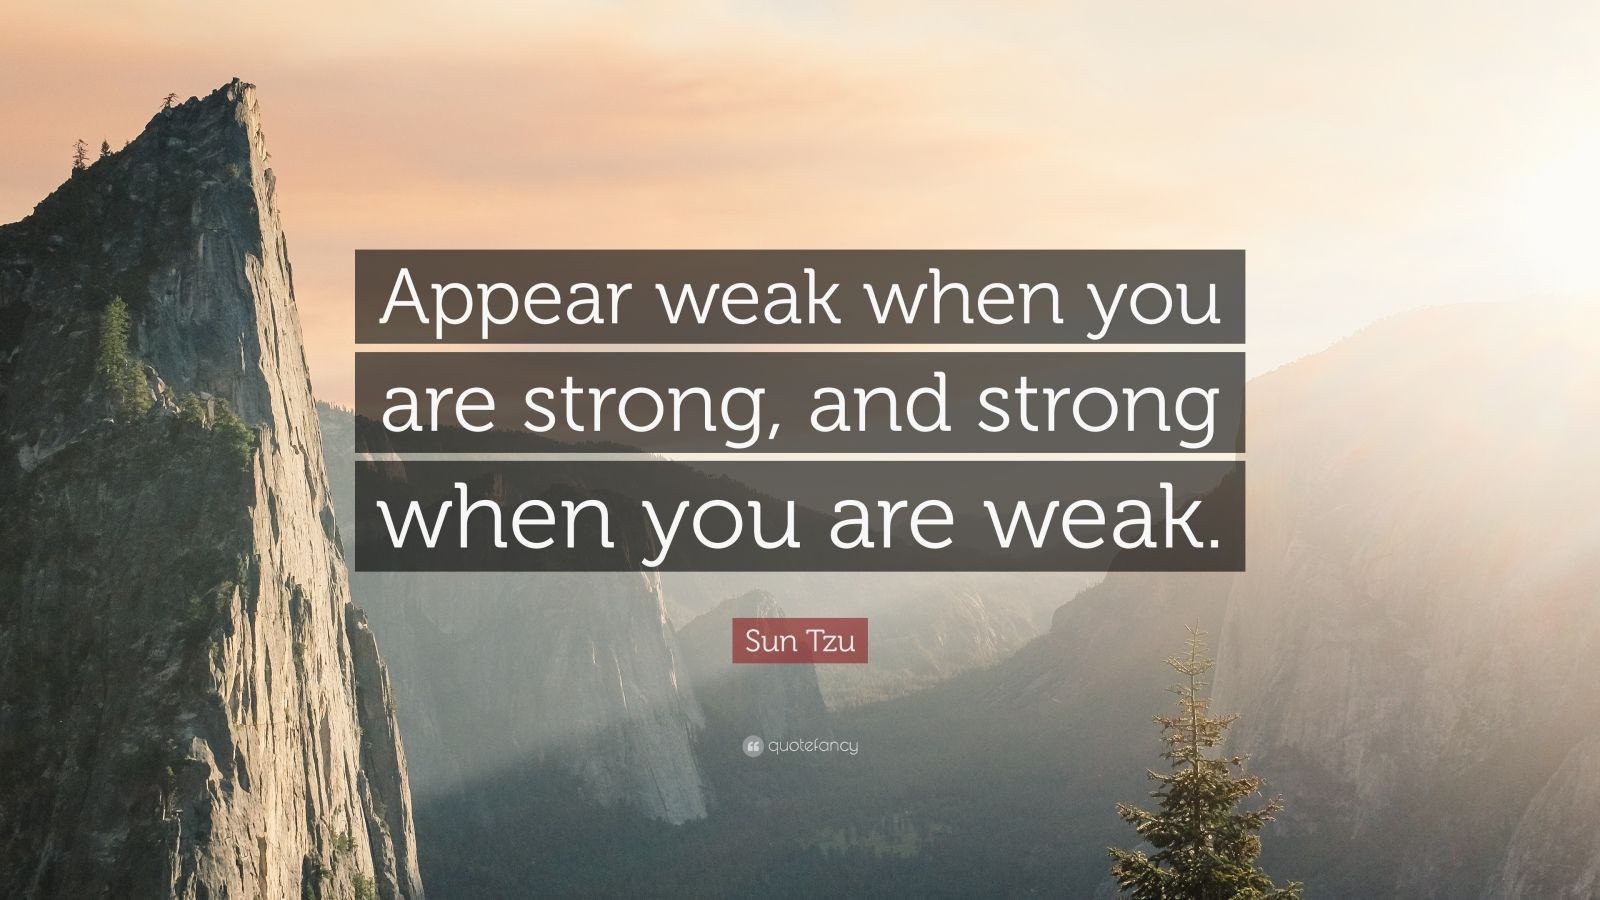 Sun Tzu Quote: “Appear weak when you are strong, and strong when you